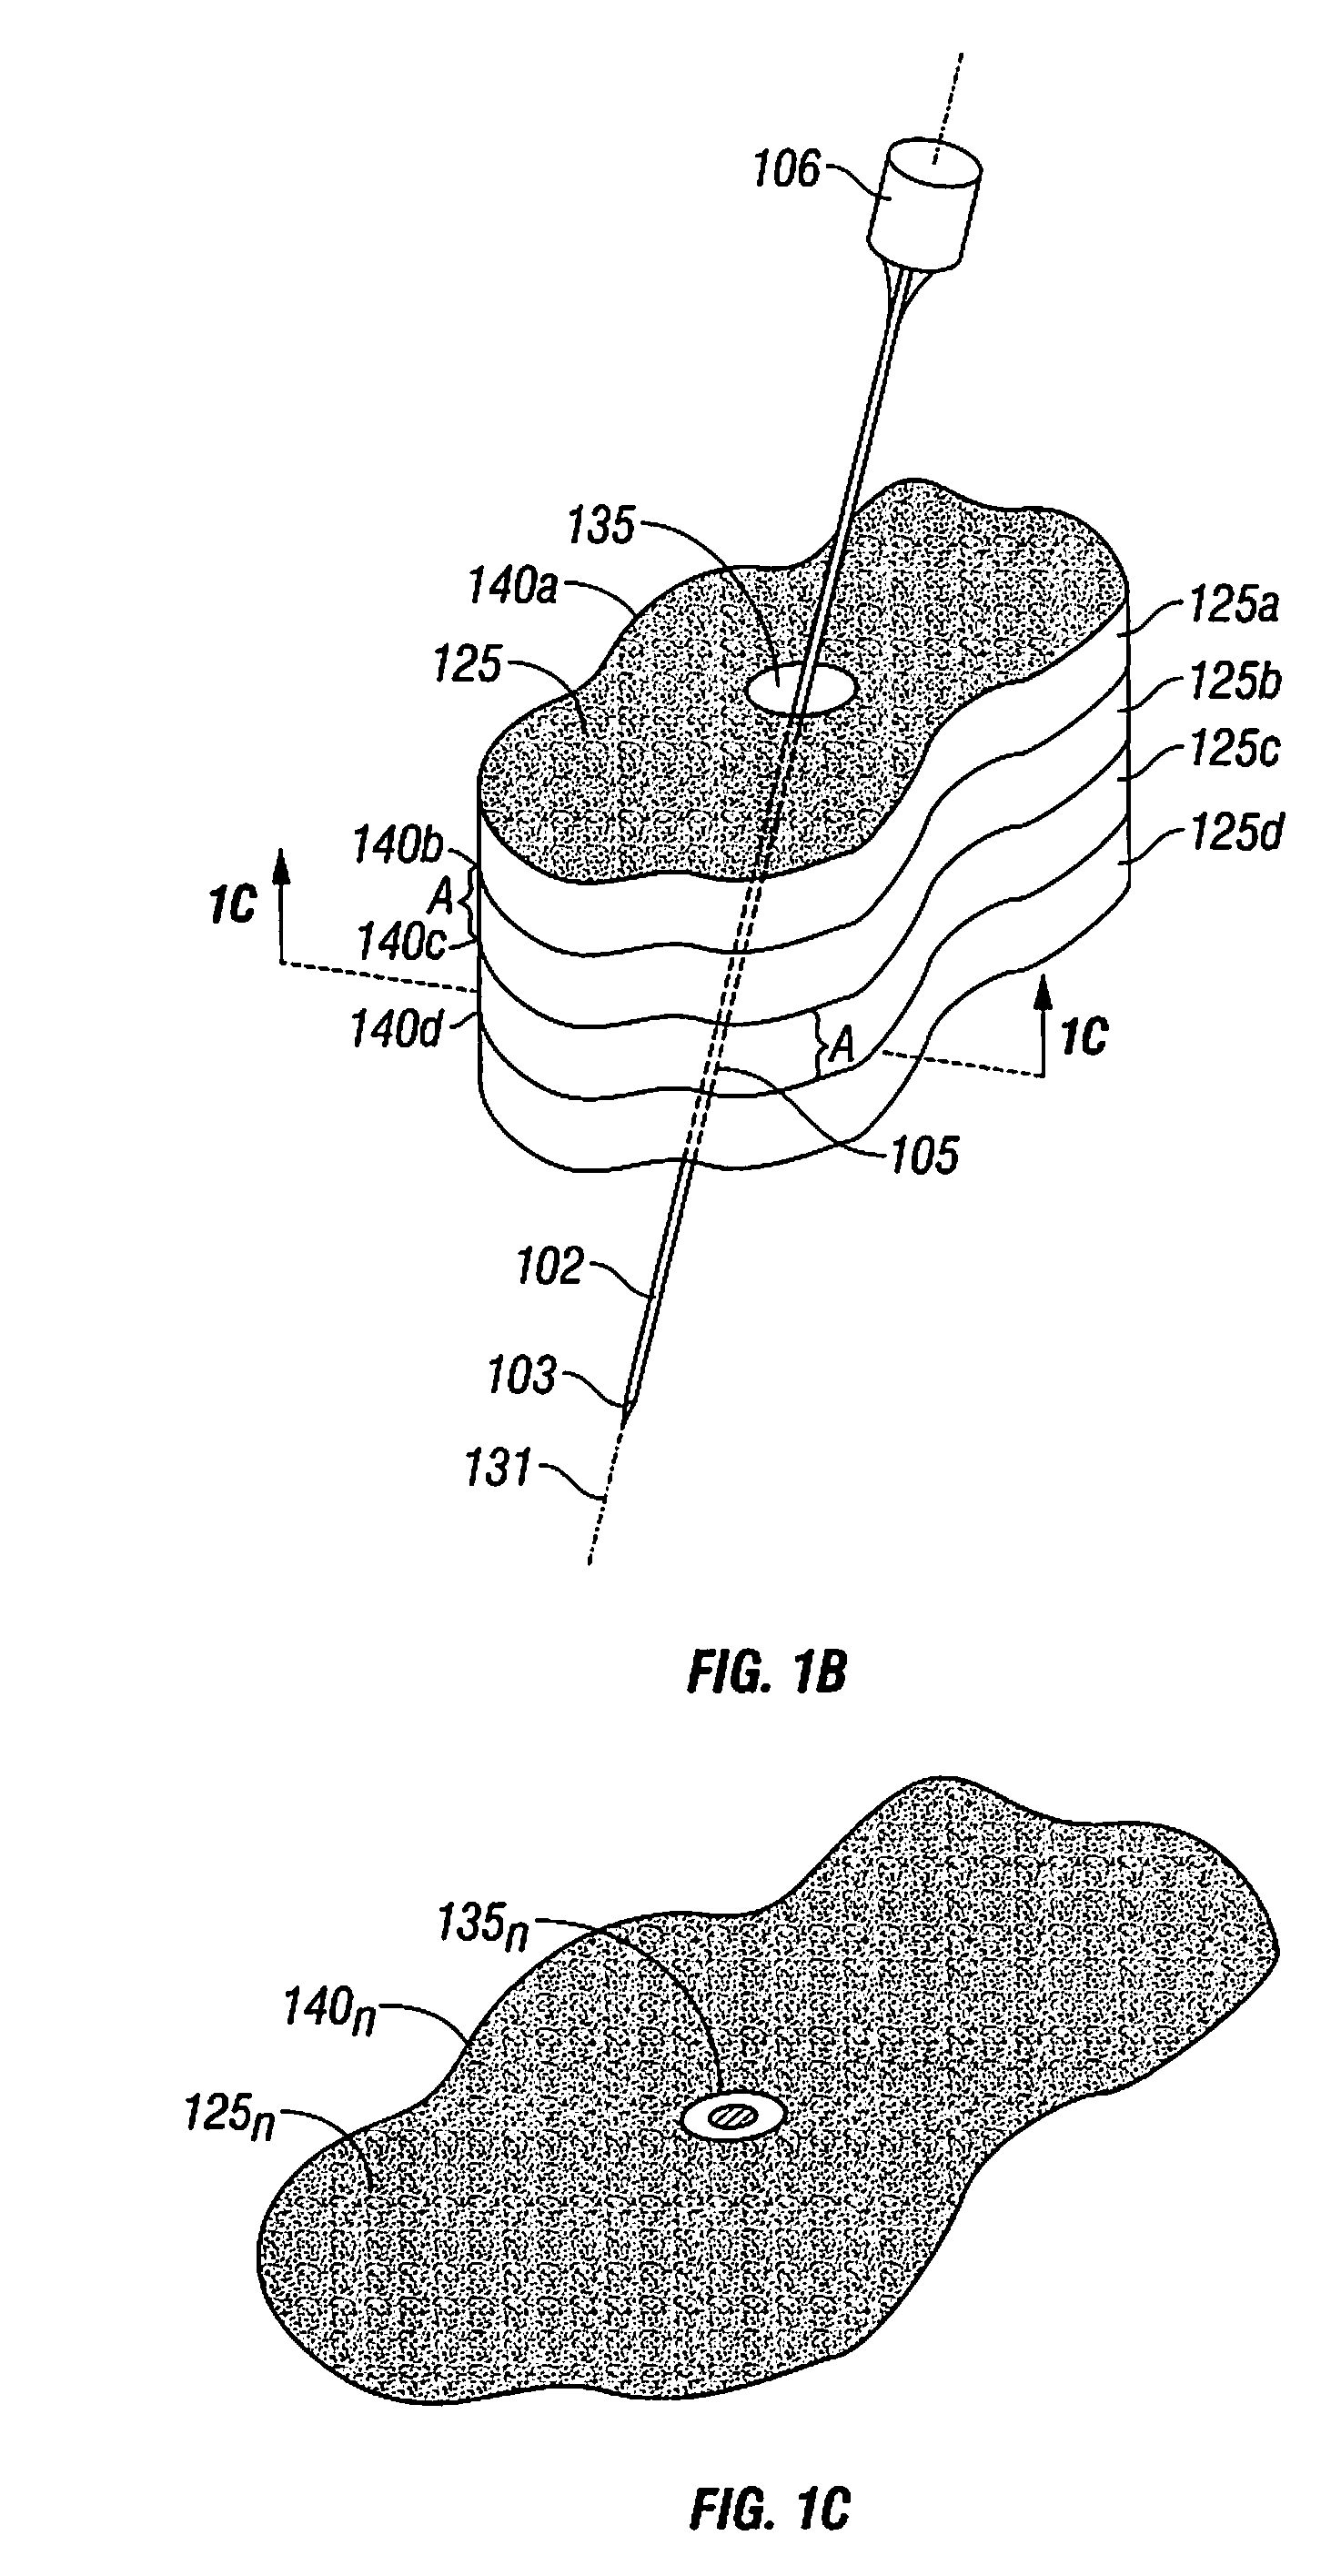 Method for Volume Determination and Geometric Reconstruction